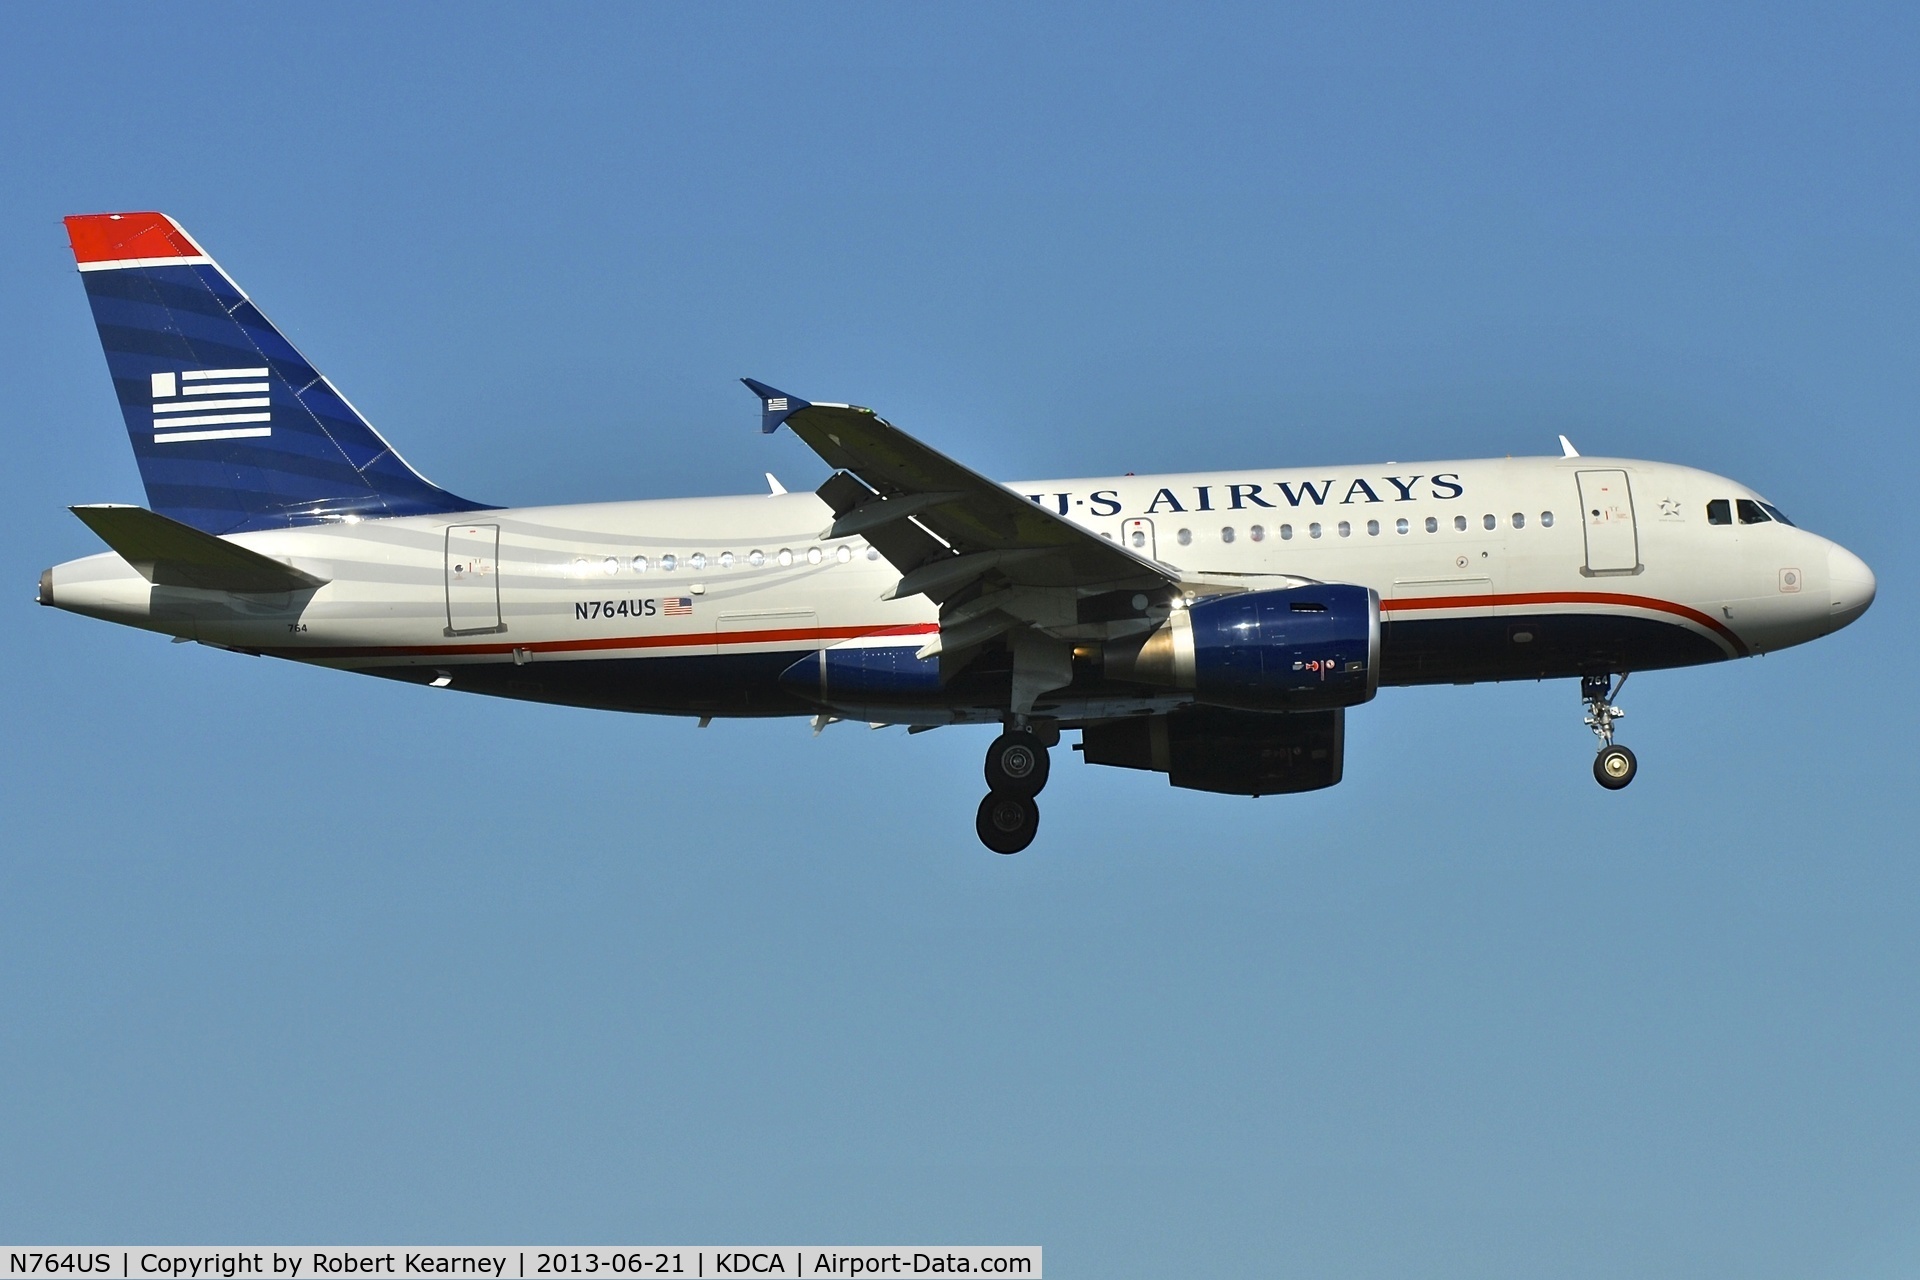 N764US, 2000 Airbus A319-112 C/N 1369, On short finals for r/w 19